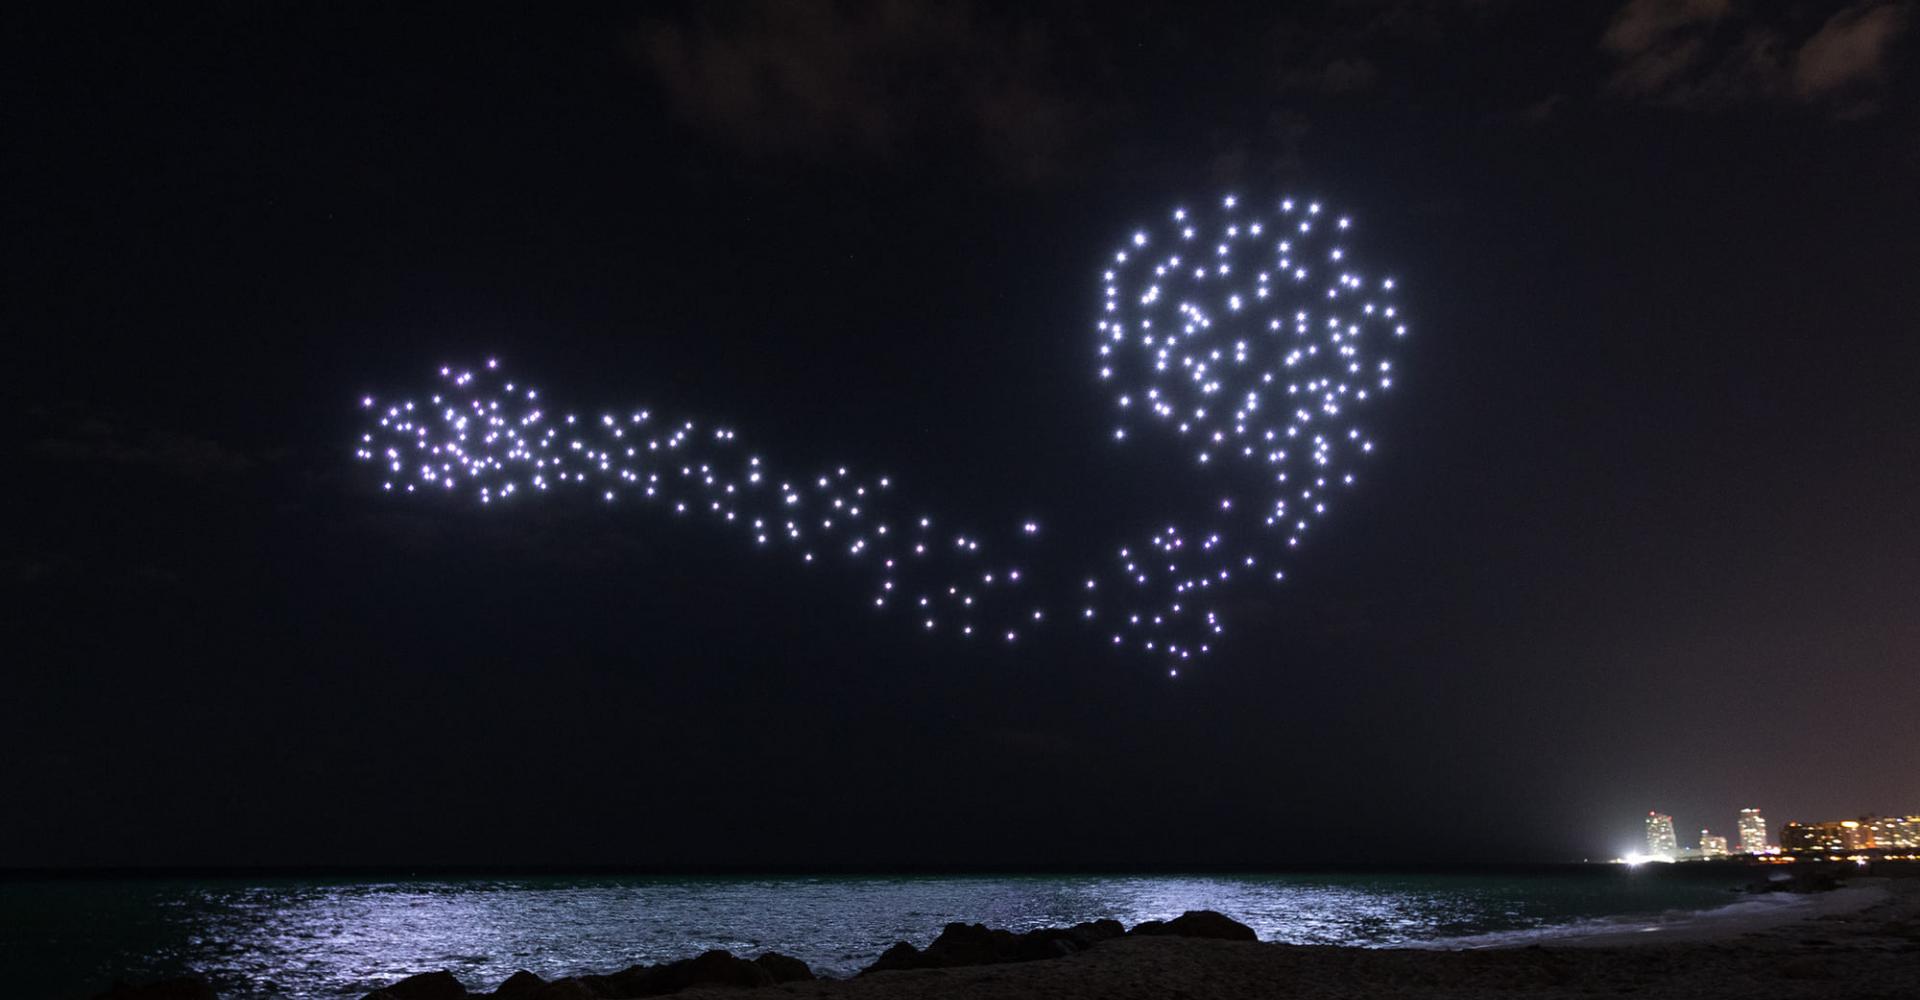 Light show in the sky over the ocean